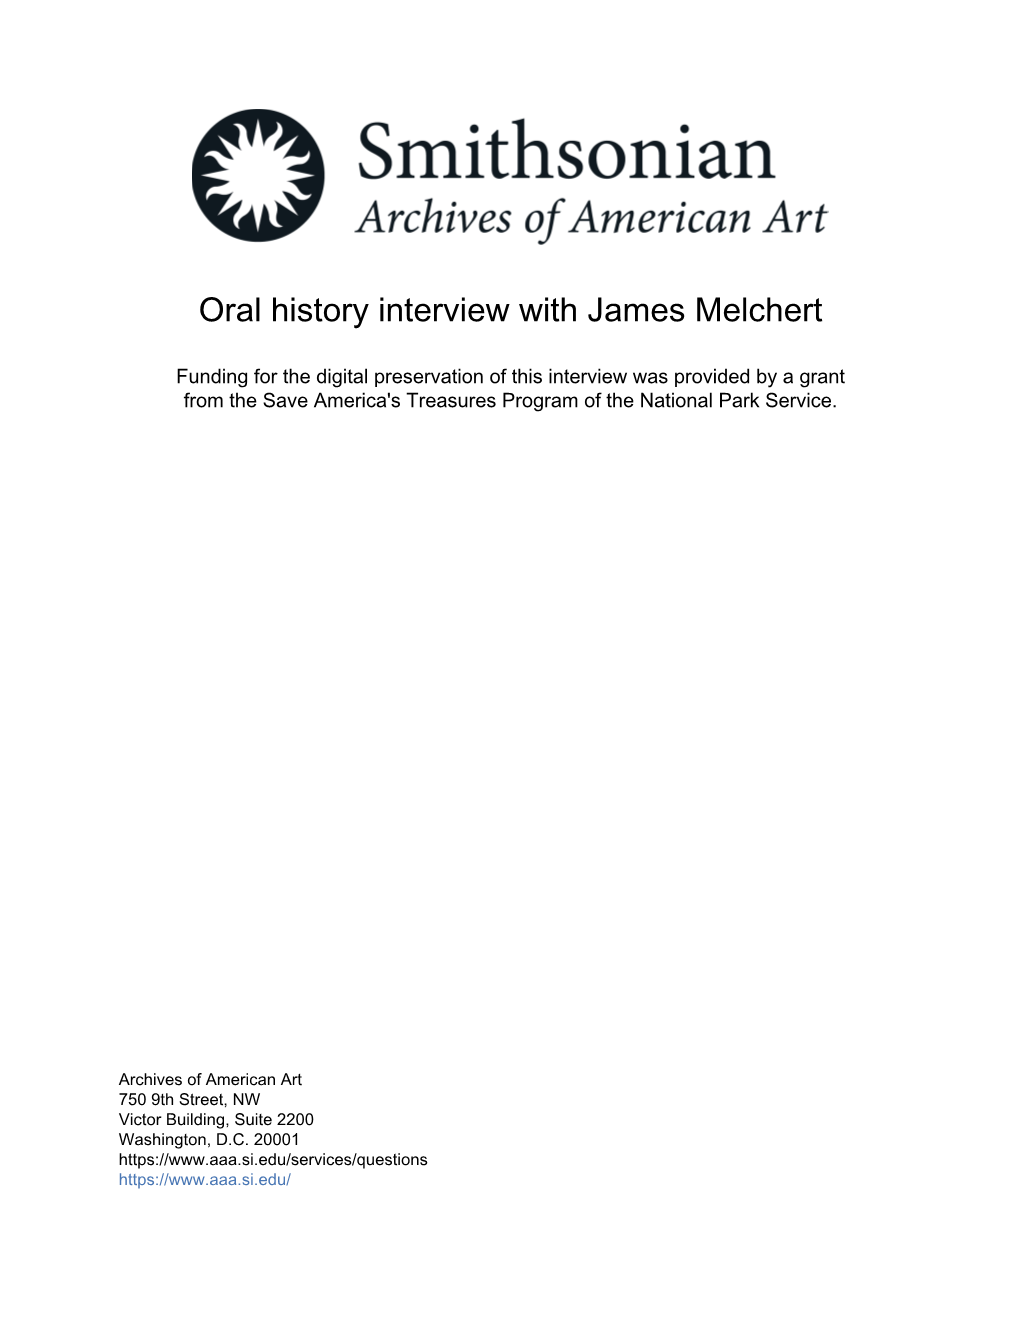 Oral History Interview with James Melchert